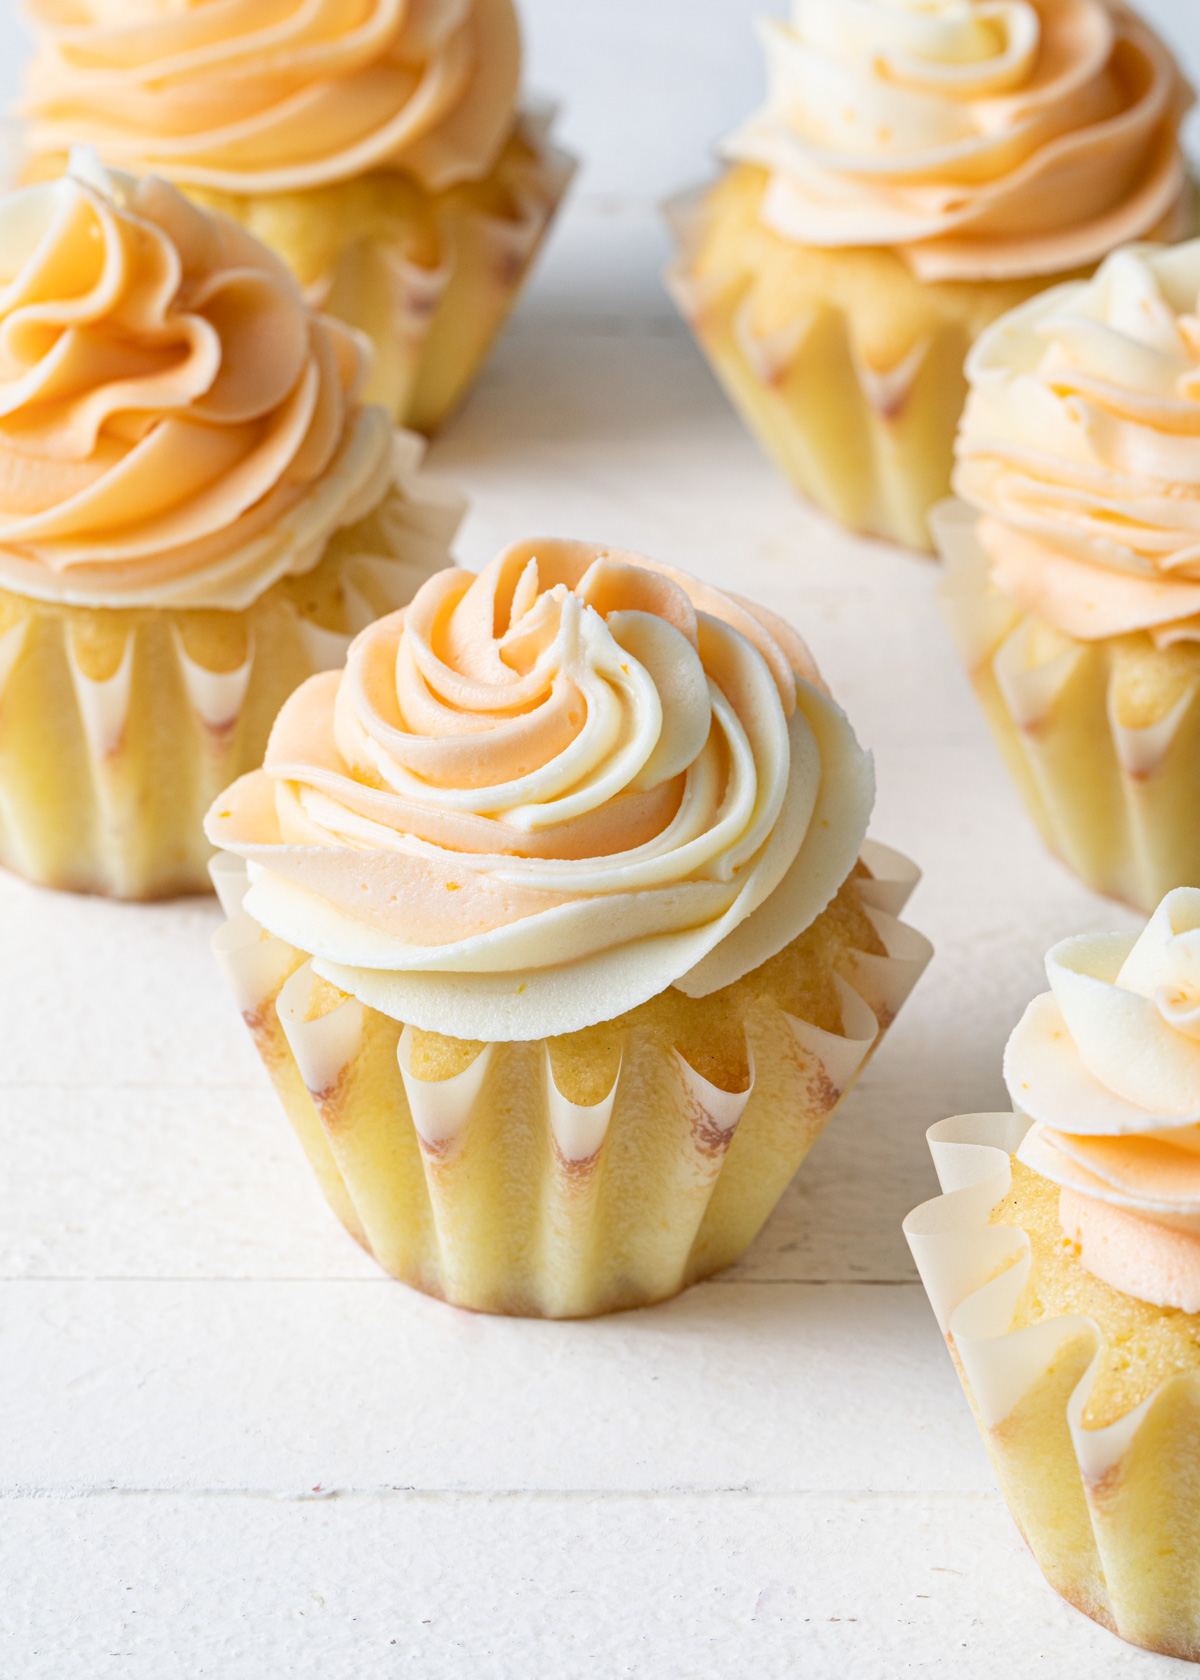 A white background with a cupcake and swirls of orange buttercream piped on top